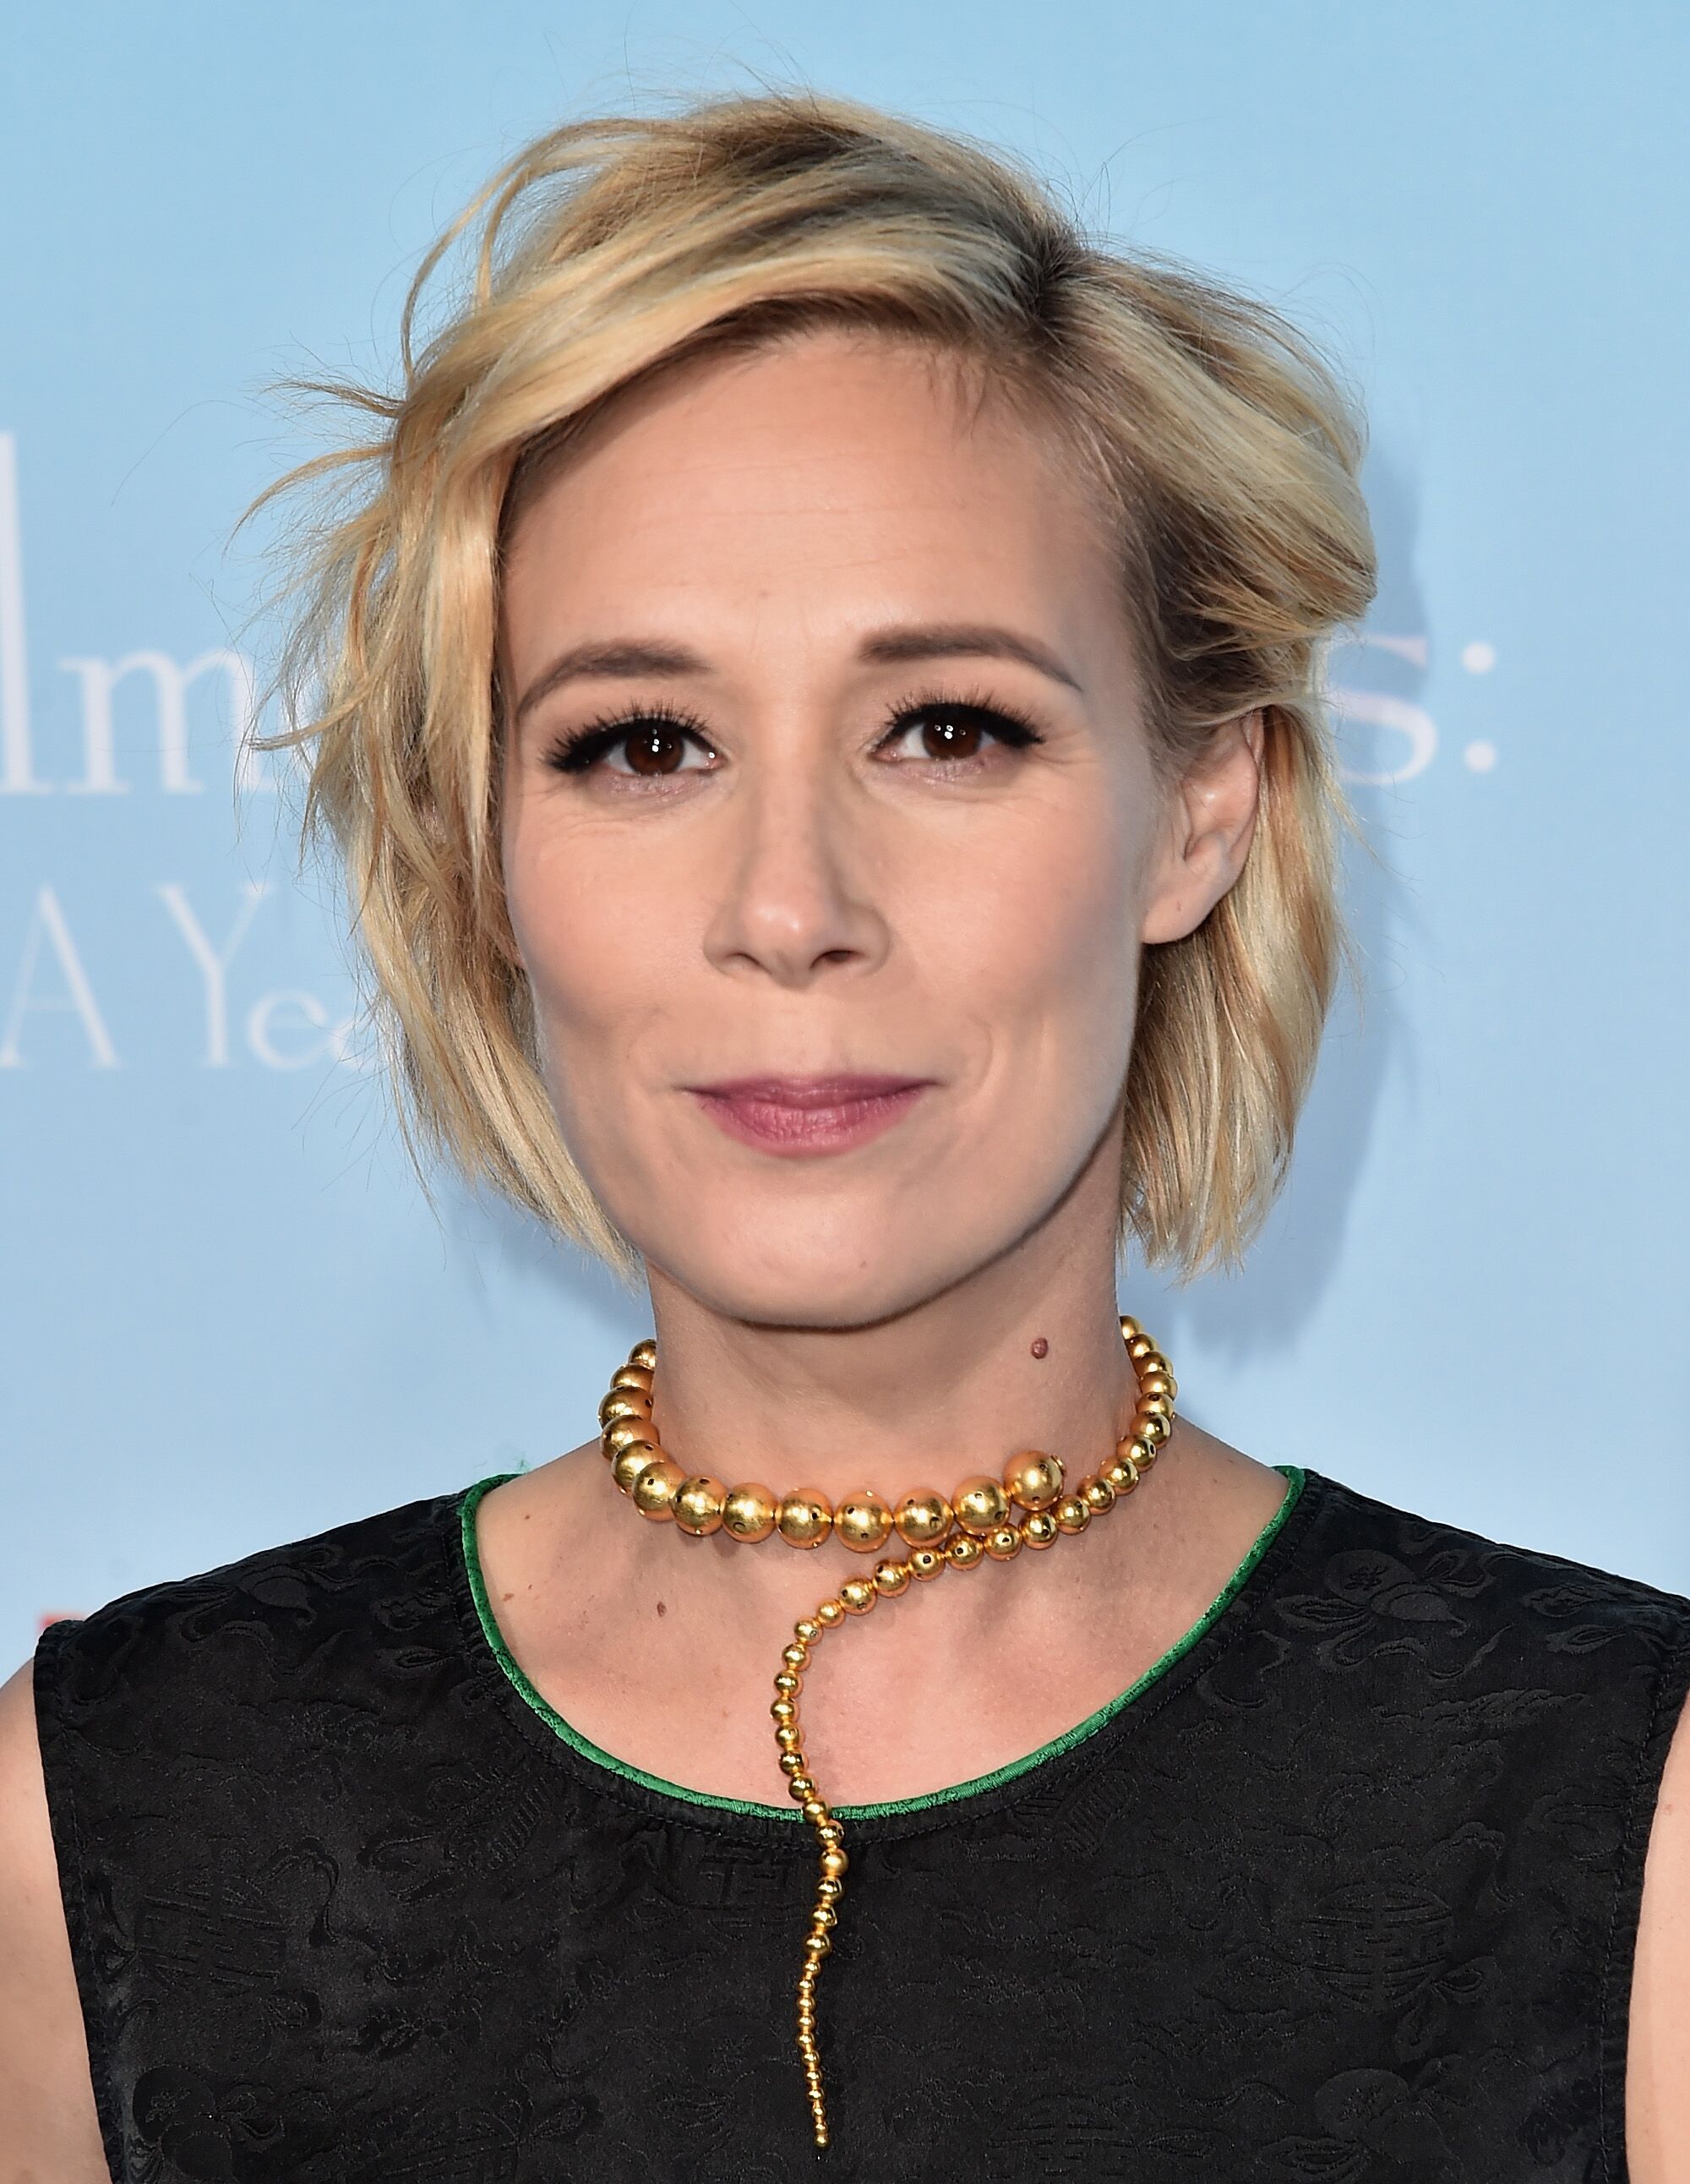 Actress Liza Weil attends the premiere of Netflix's "Gilmore Girls: A Year In The Life" at the Regency Bruin Theatre on November 18, 2016 in Los Angeles, California | Source: Getty Images